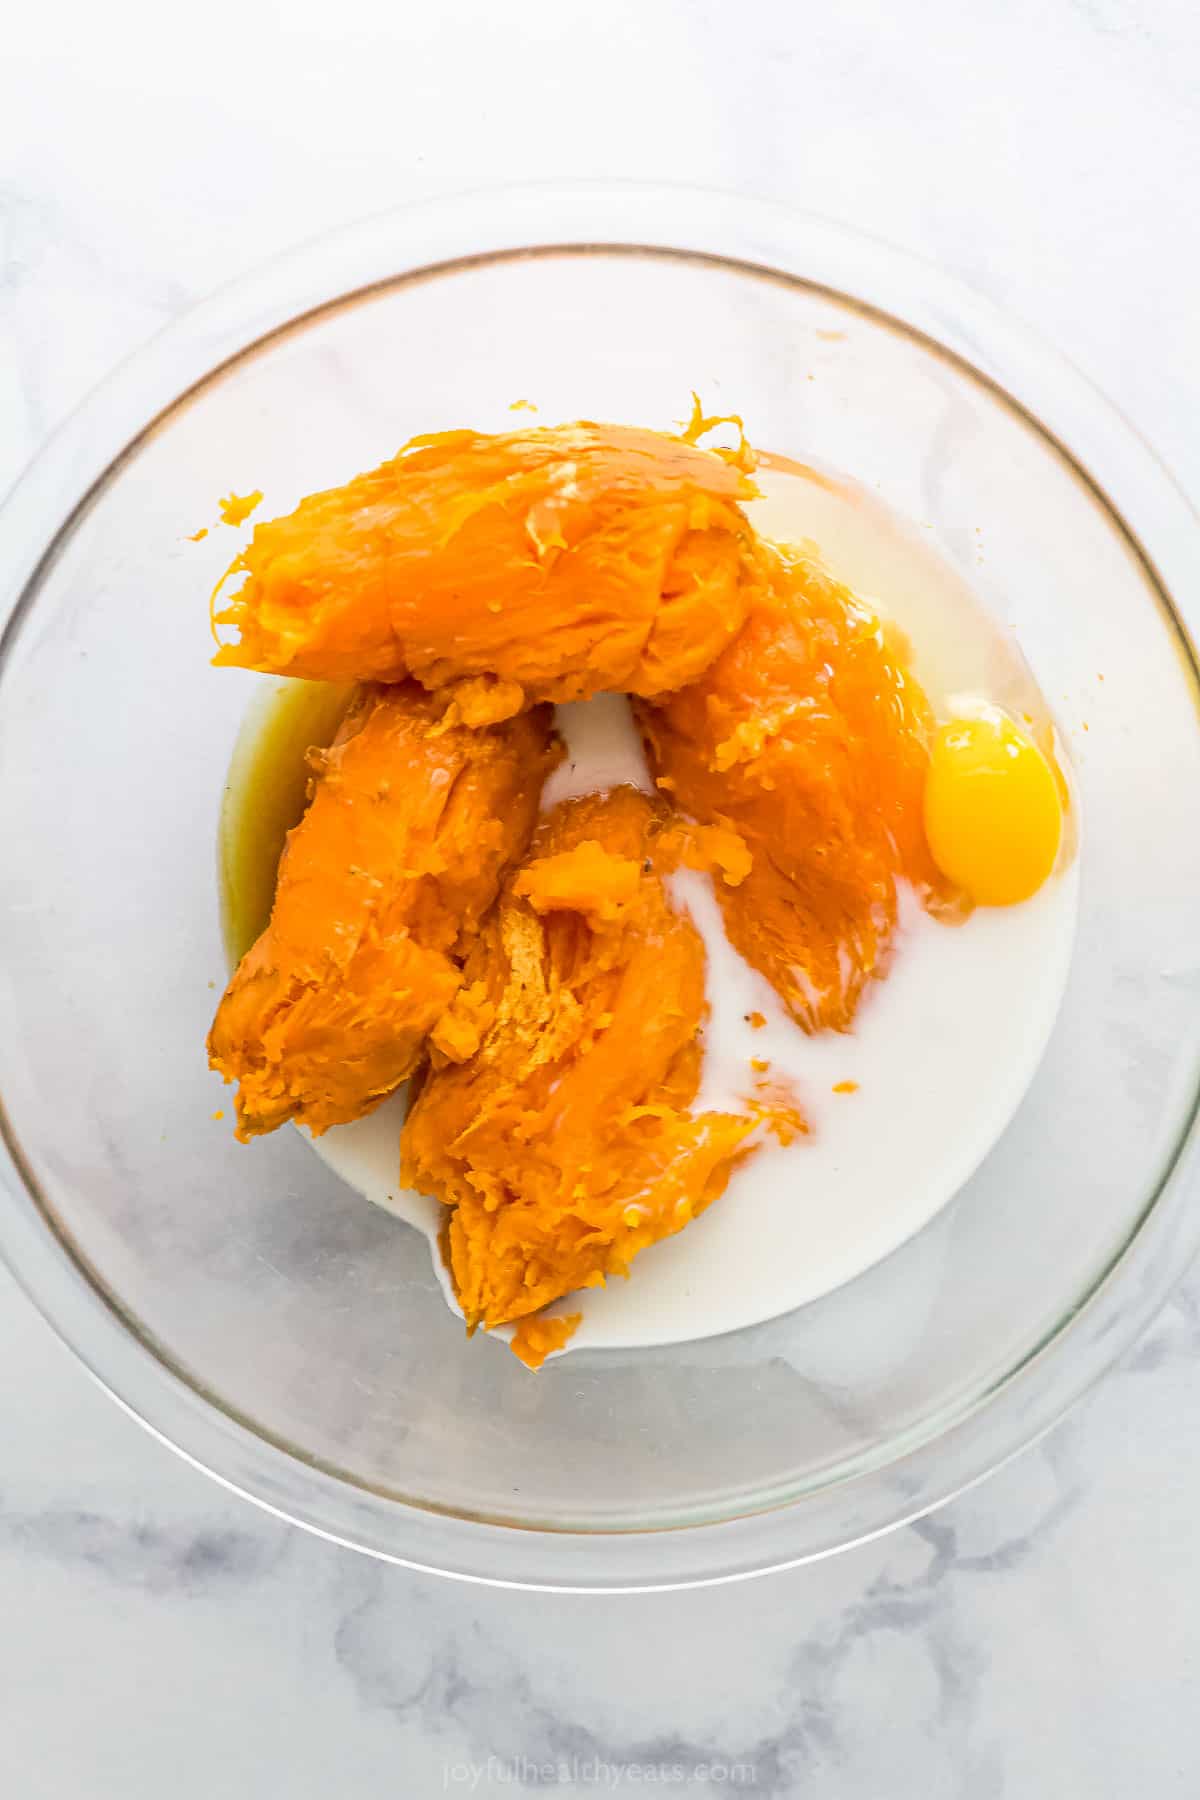 Baked and peeled sweet potatoes in a glass bowl with milk and an egg